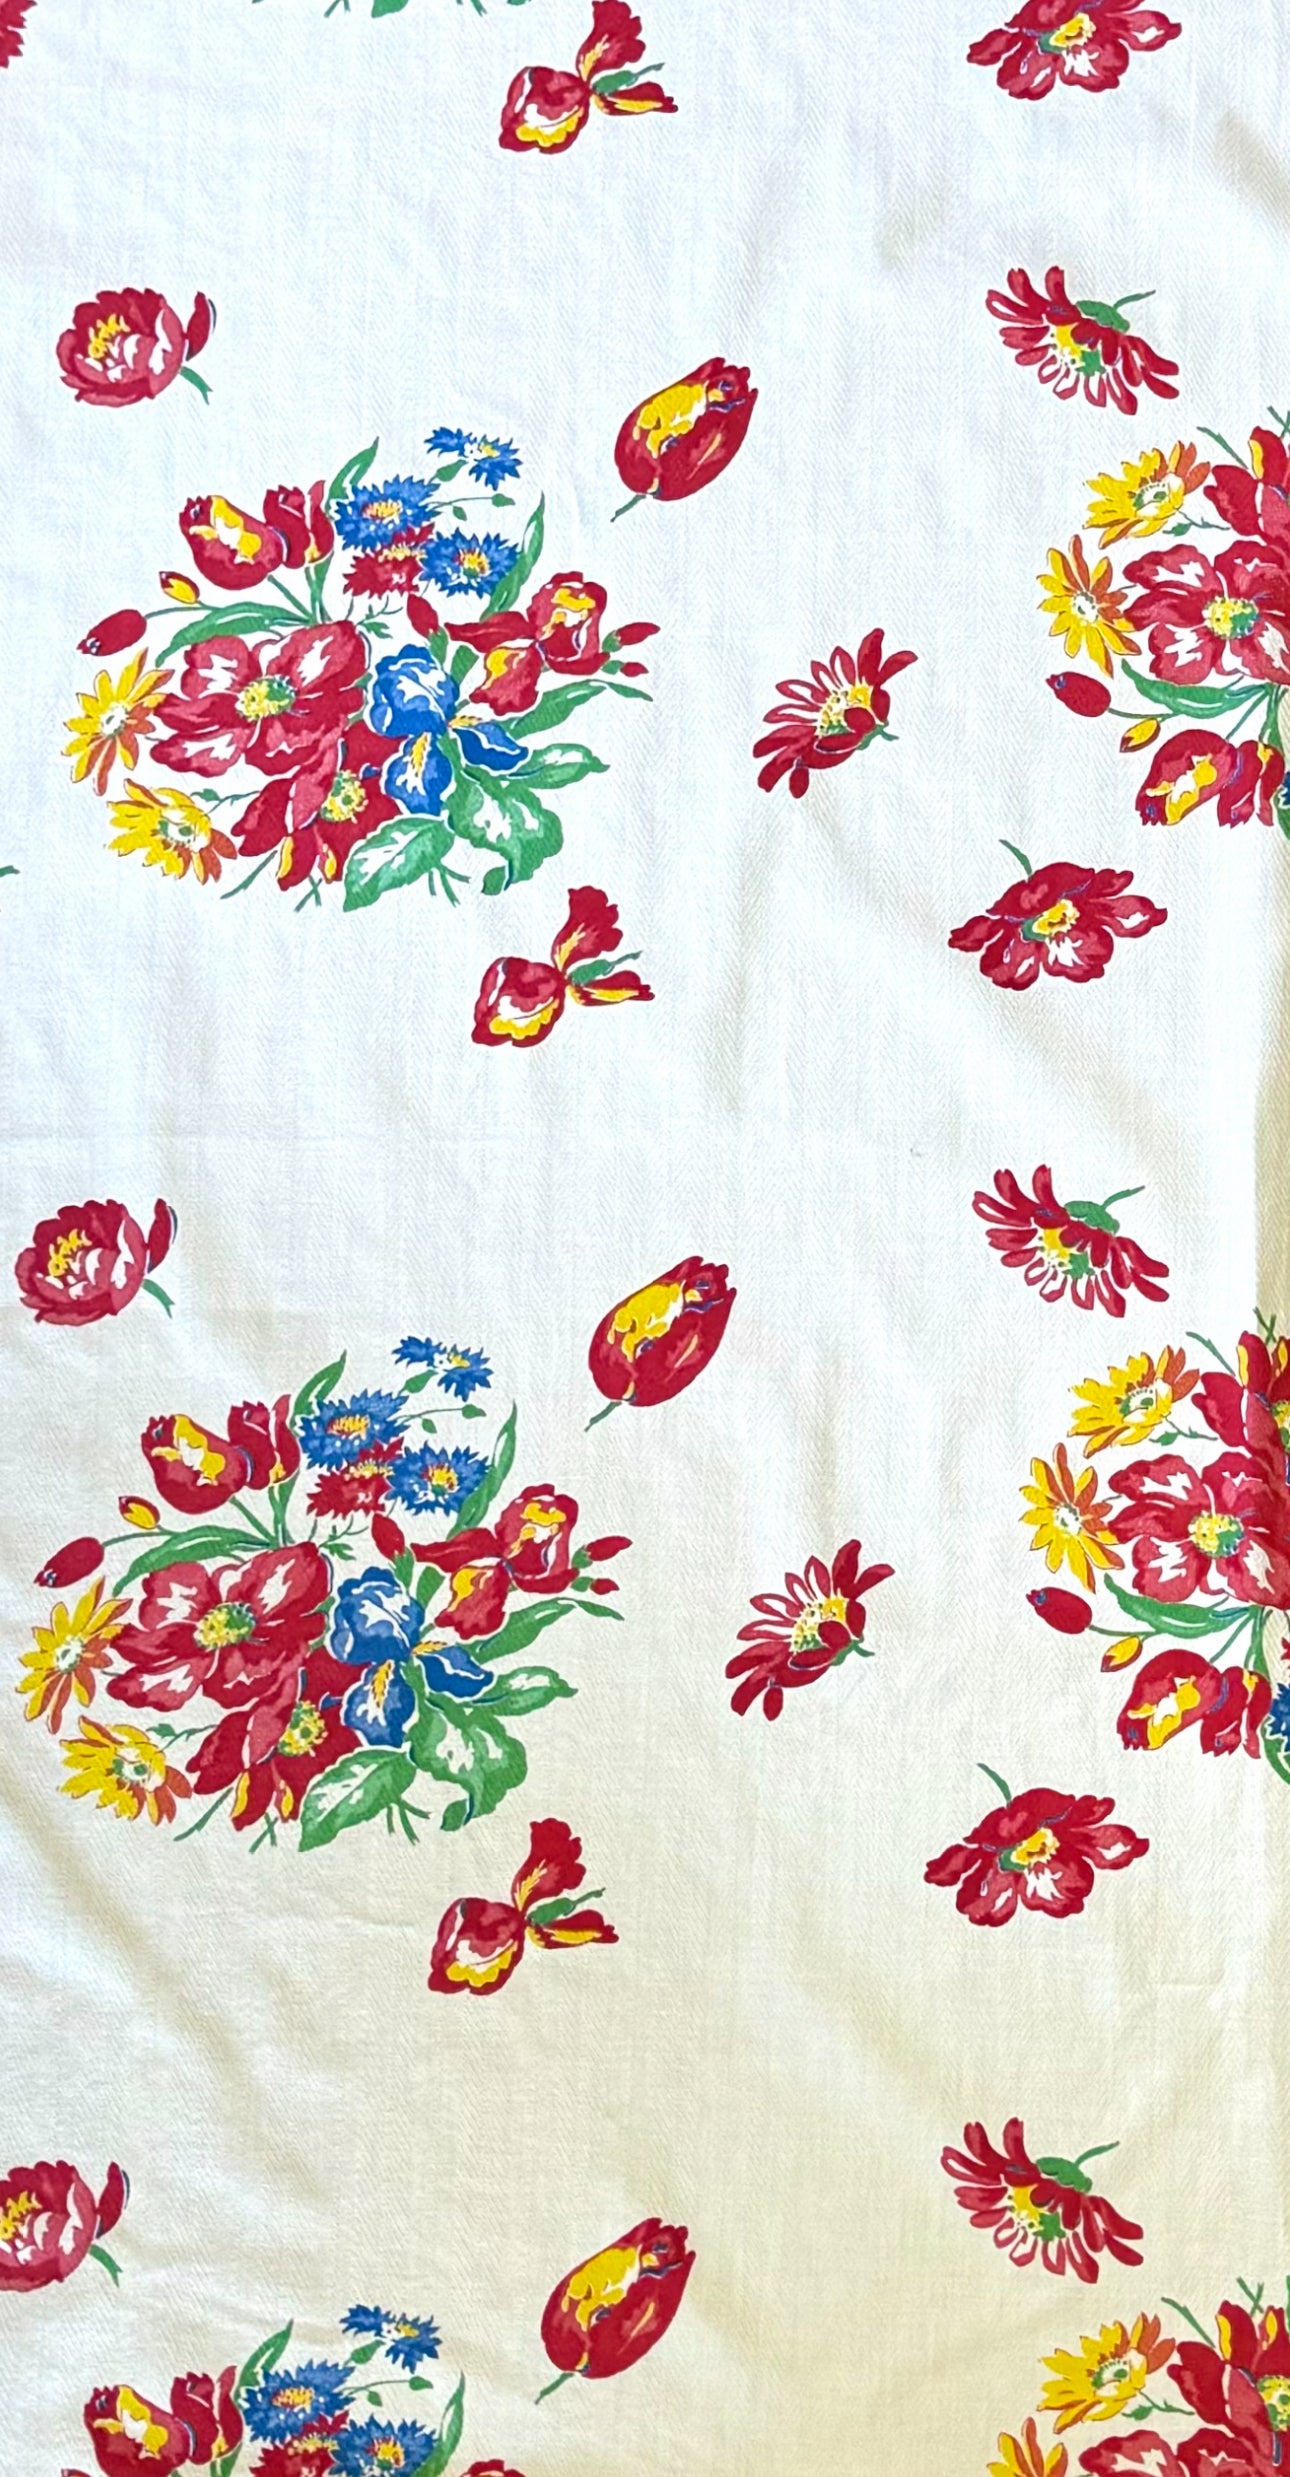 Primary Color Floral Tablecloth (BUTTON UP COMMISSION)